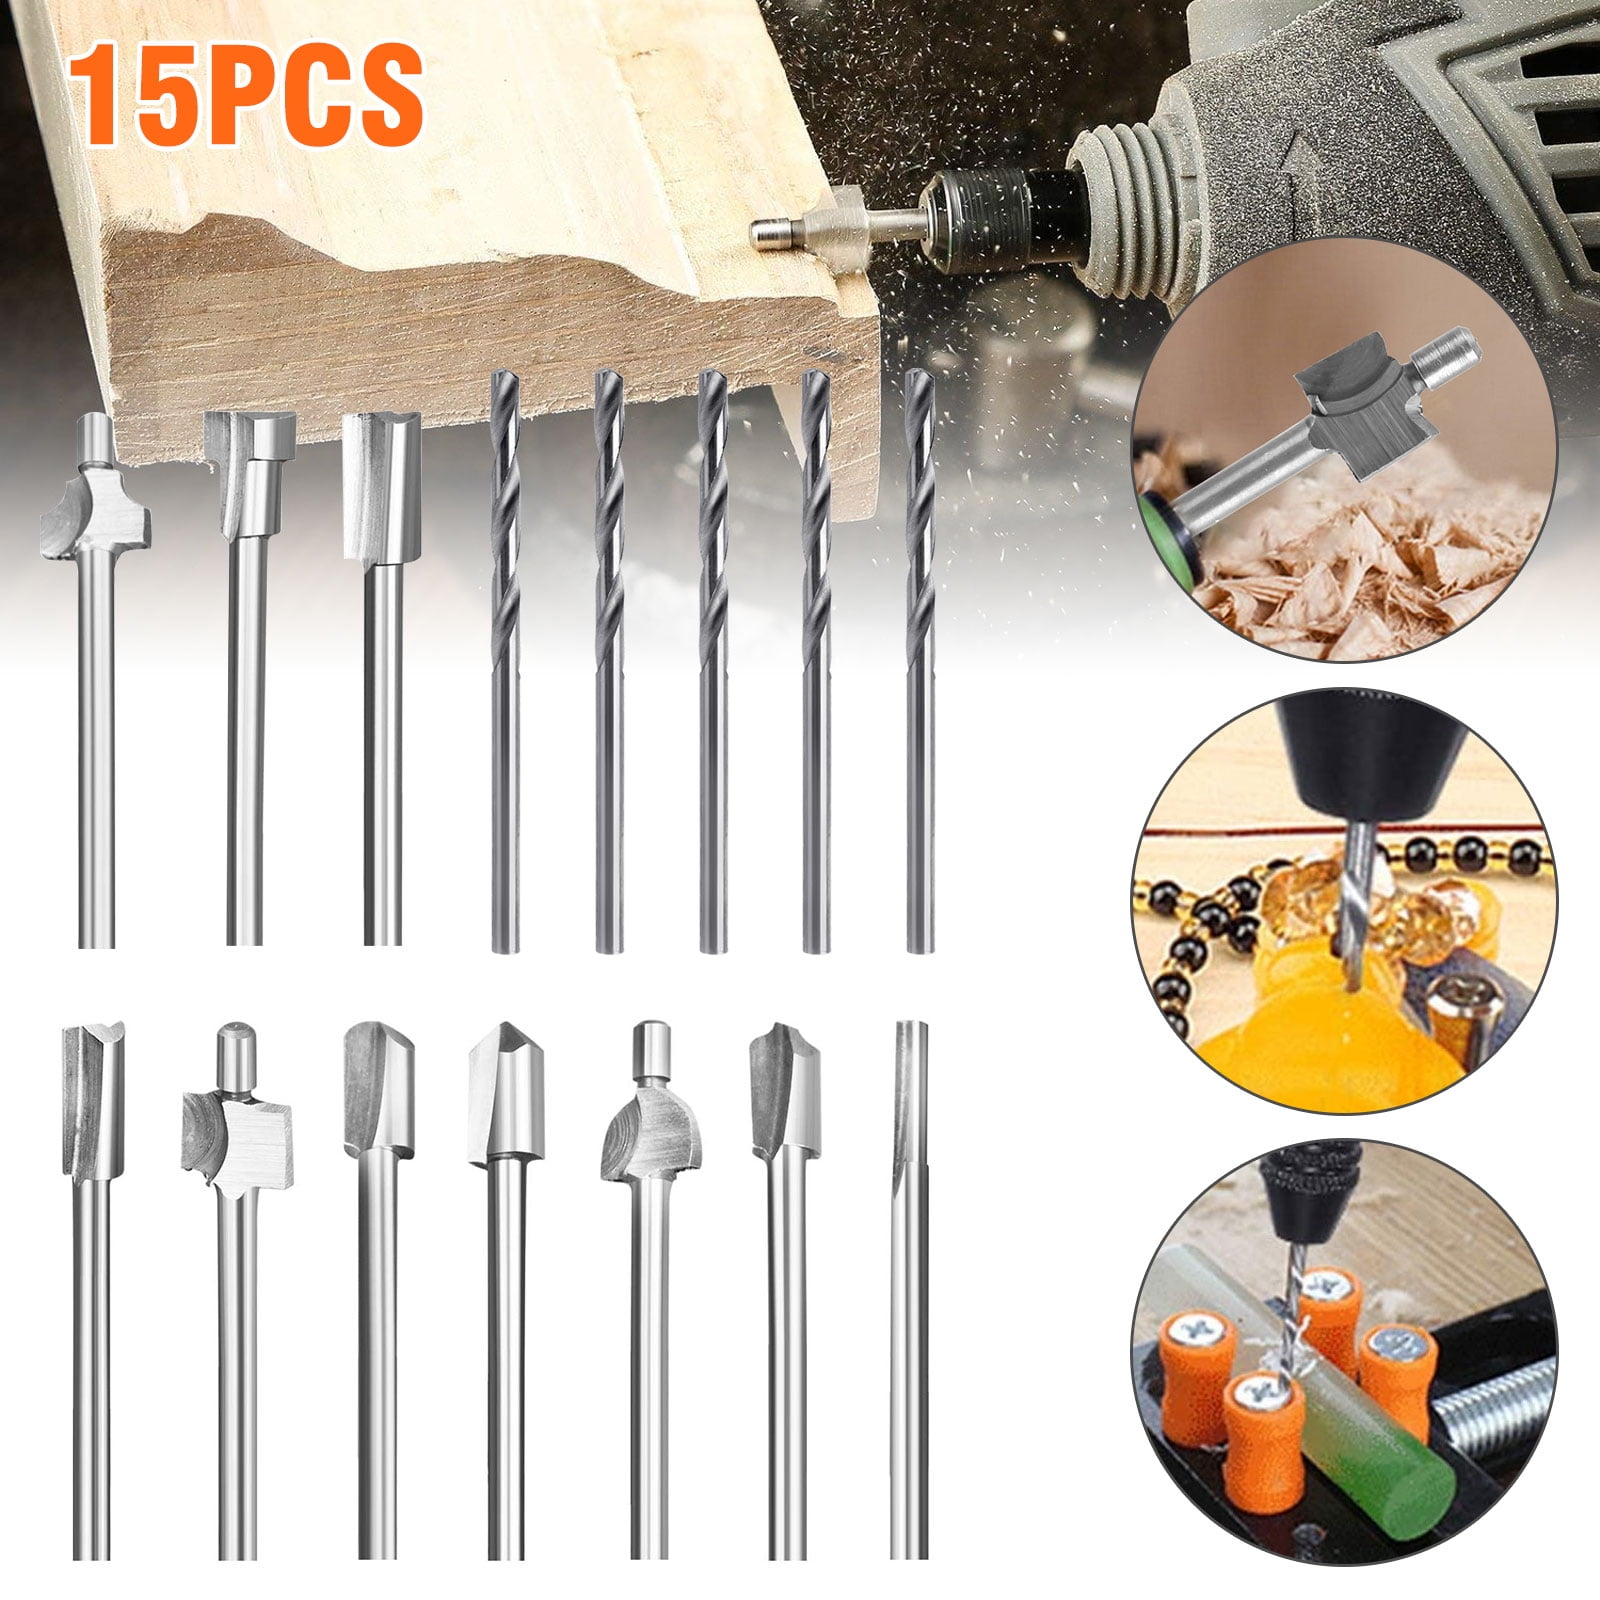 4Pcs Router Bits Set Rotarys Power Tool Accessories Woodworking Tool for Woodworking Machine Tools and Engraving Machines 8mm Carbide Tipped Woodworking Milling Cutter